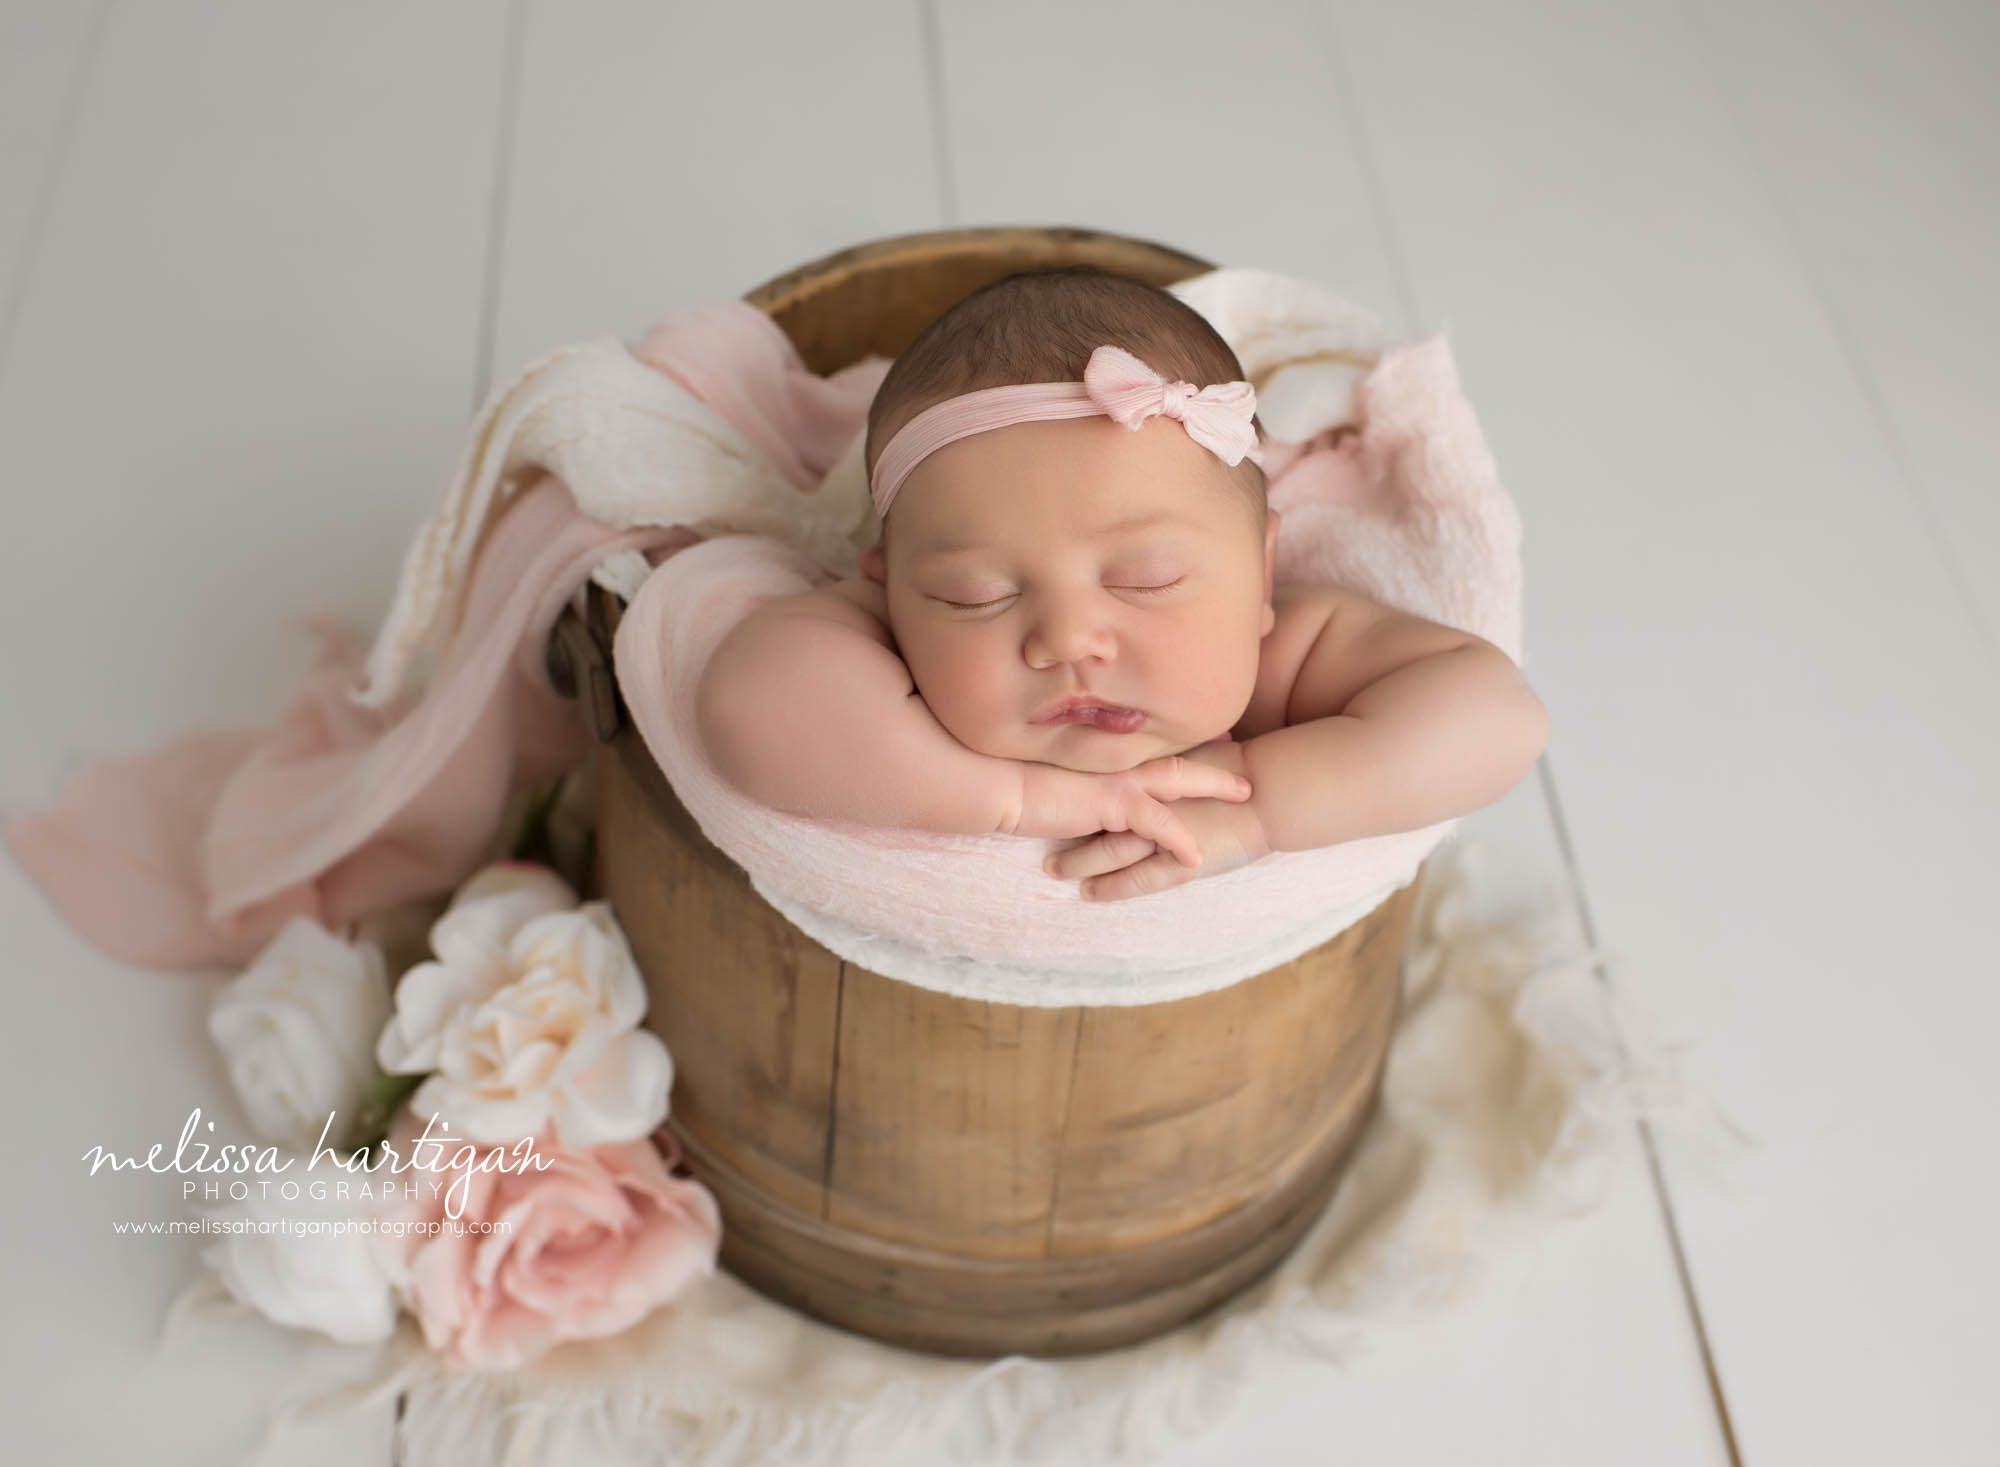 newborn baby girl posed in wooden barrel with cream and pink flowers wearing pink bow headband new london county CT newborn photography